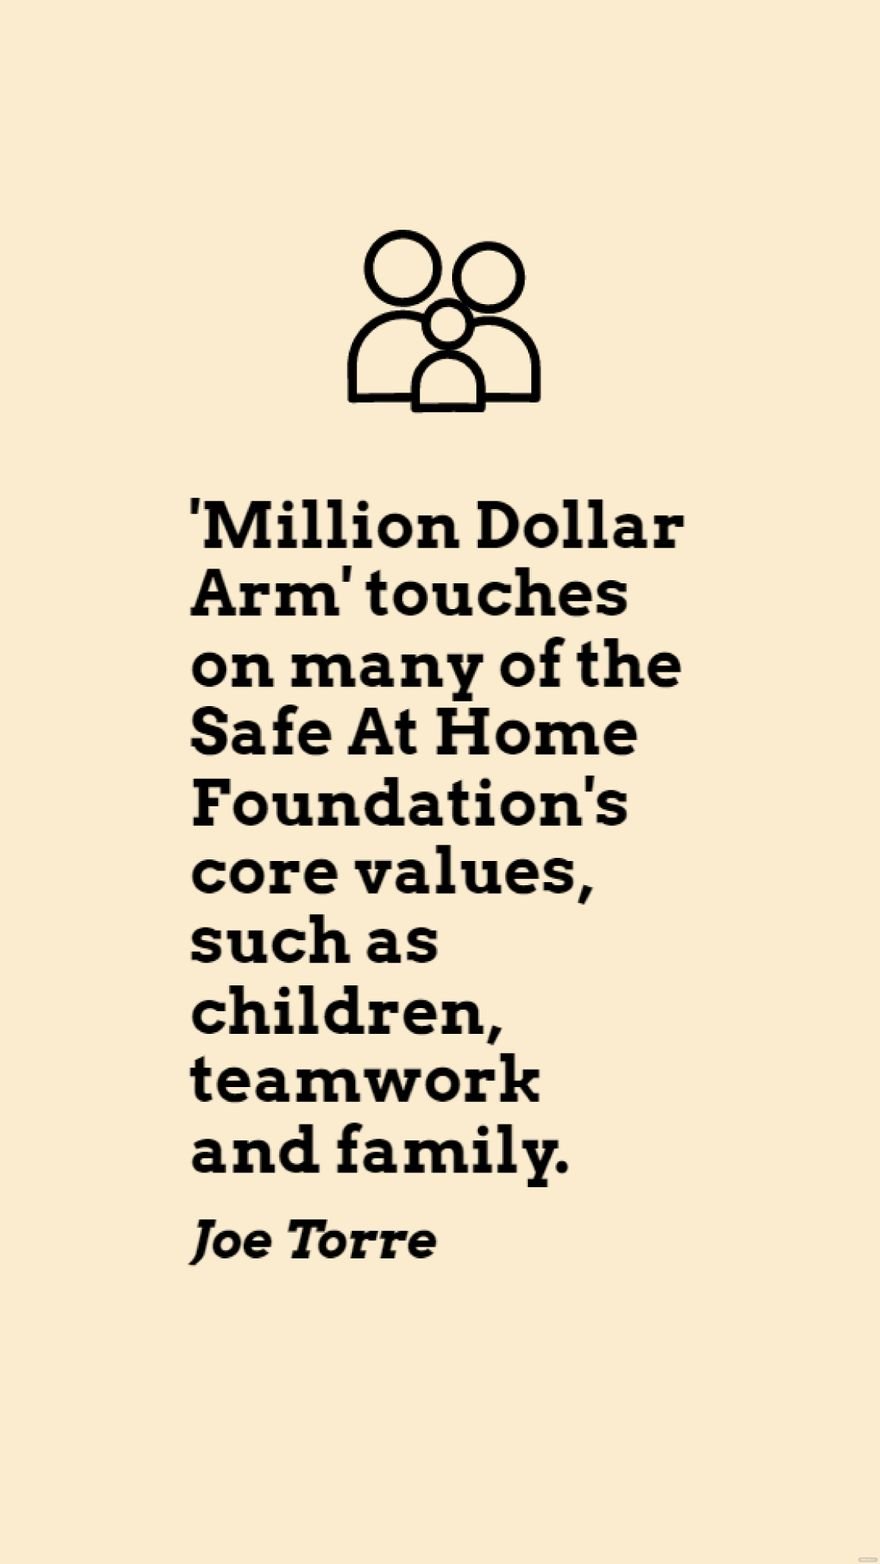 Free Joe Torre - 'Million Dollar Arm' touches on many of the Safe At Home Foundation's core values, such as children, teamwork and family. in JPG